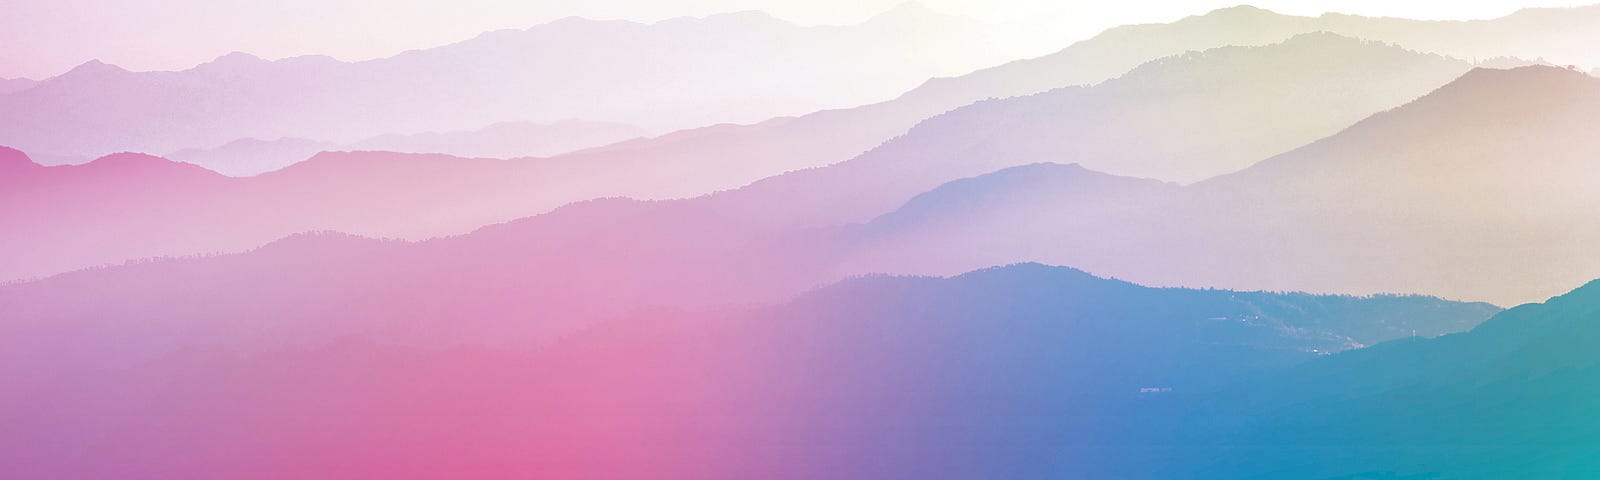 Multicolored gradient image of a mountain range.